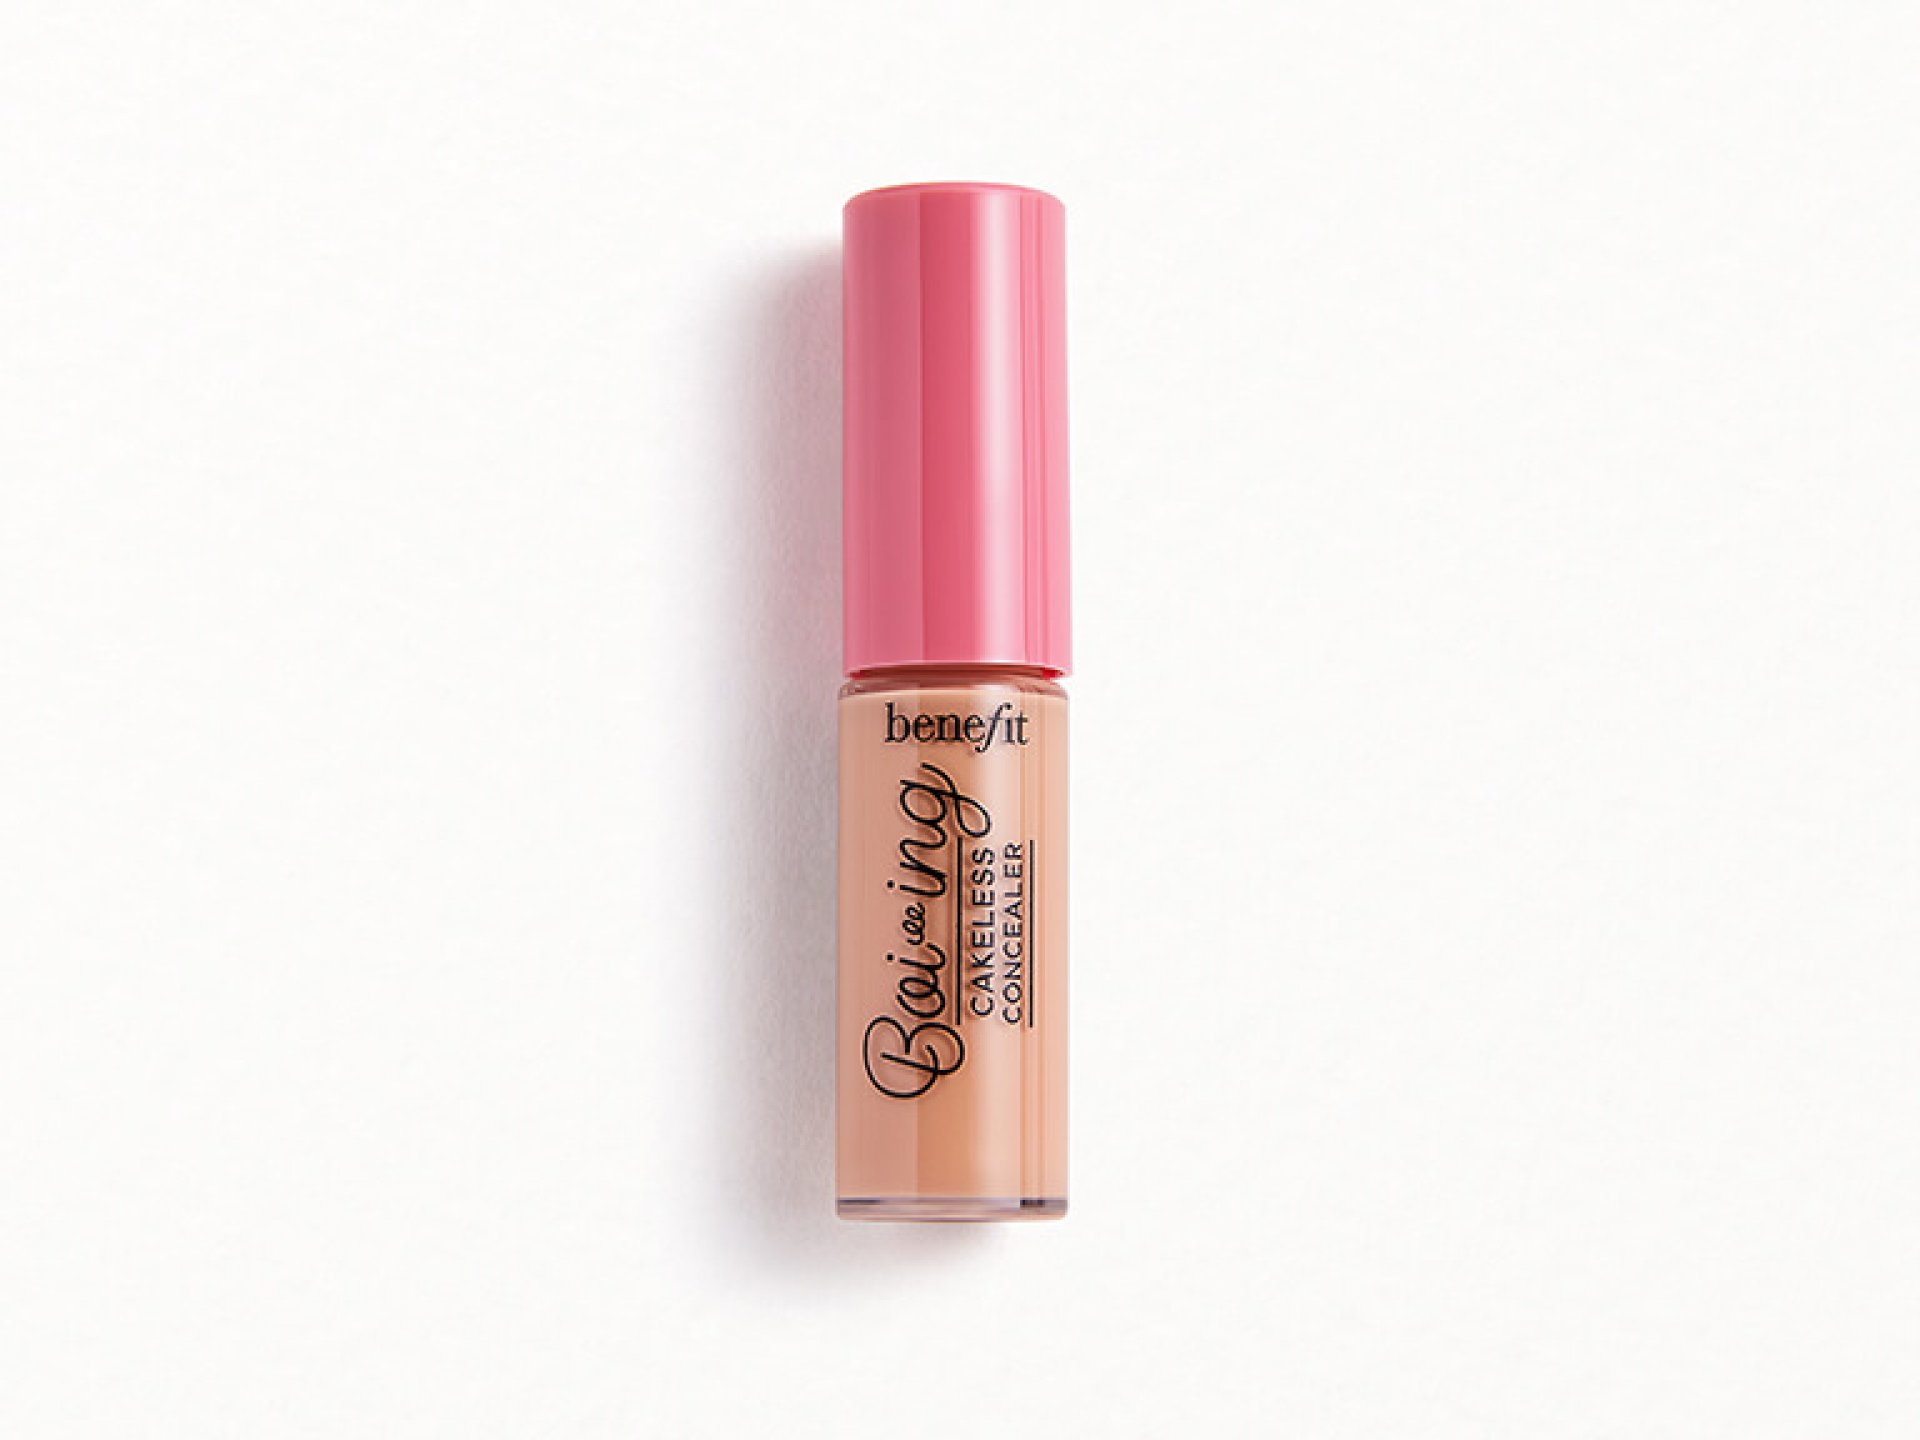 BENEFIT COSMETICS Boi-ing Cakeless Concealer in 6 Fly High - Medium Cool